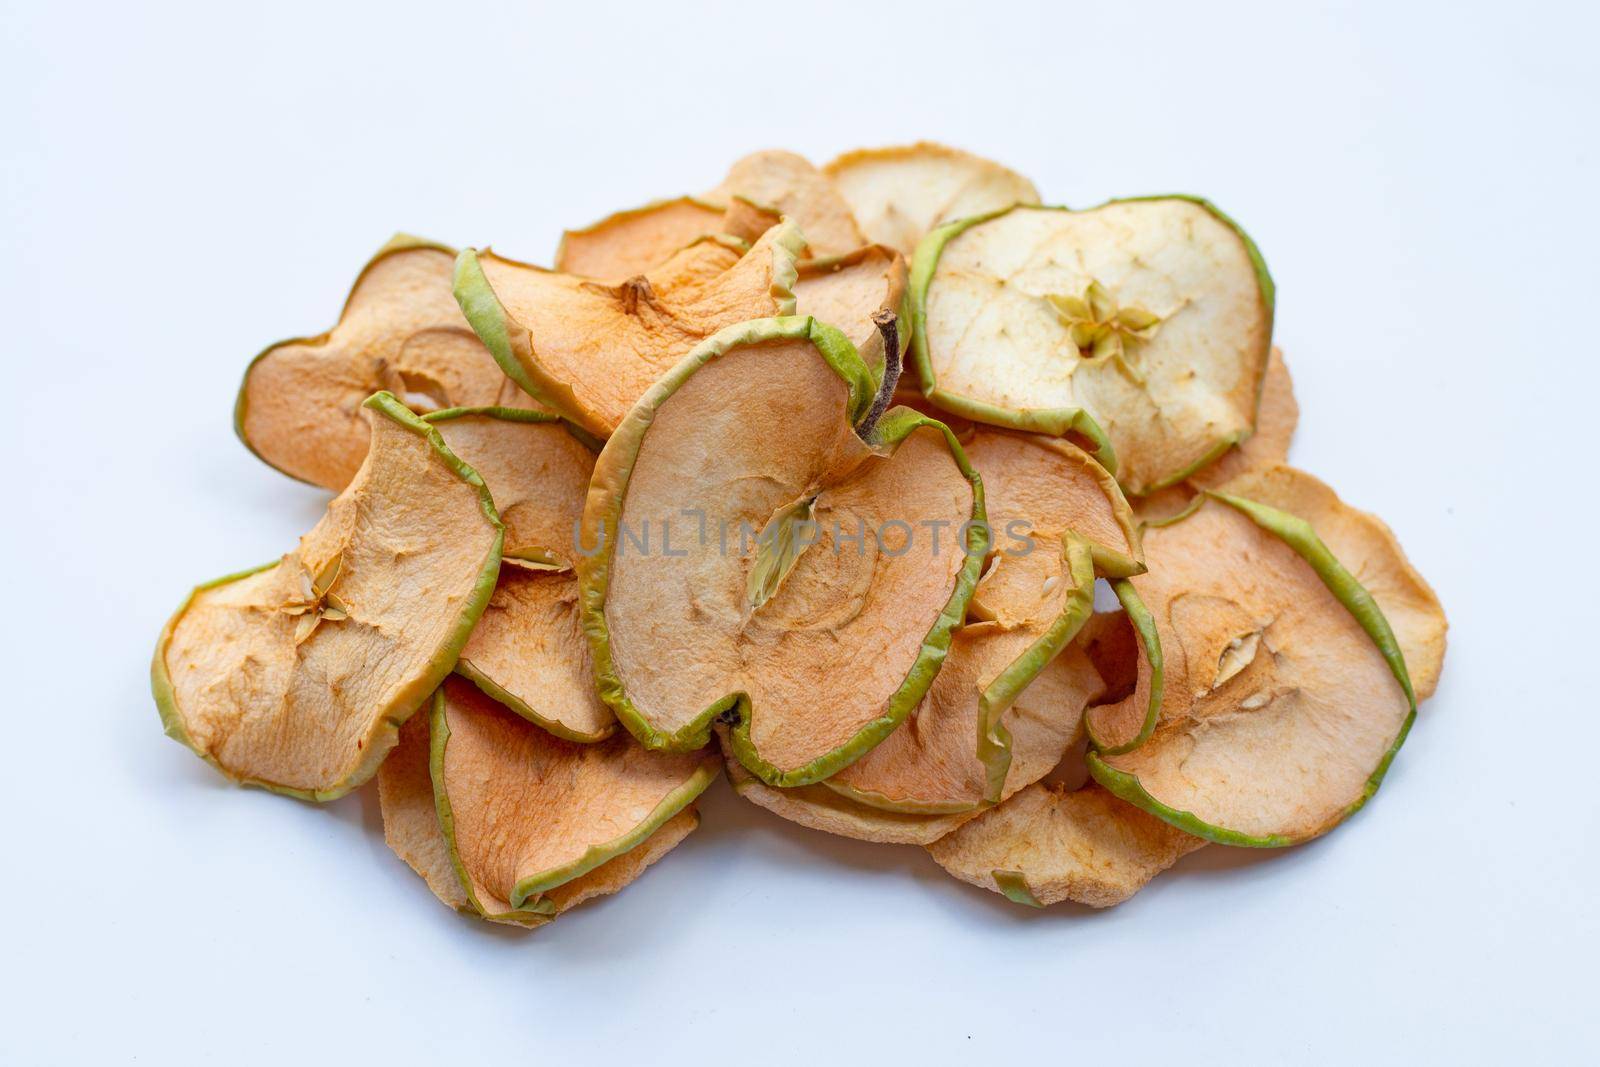 Dried apple slices on white background by Bowonpat